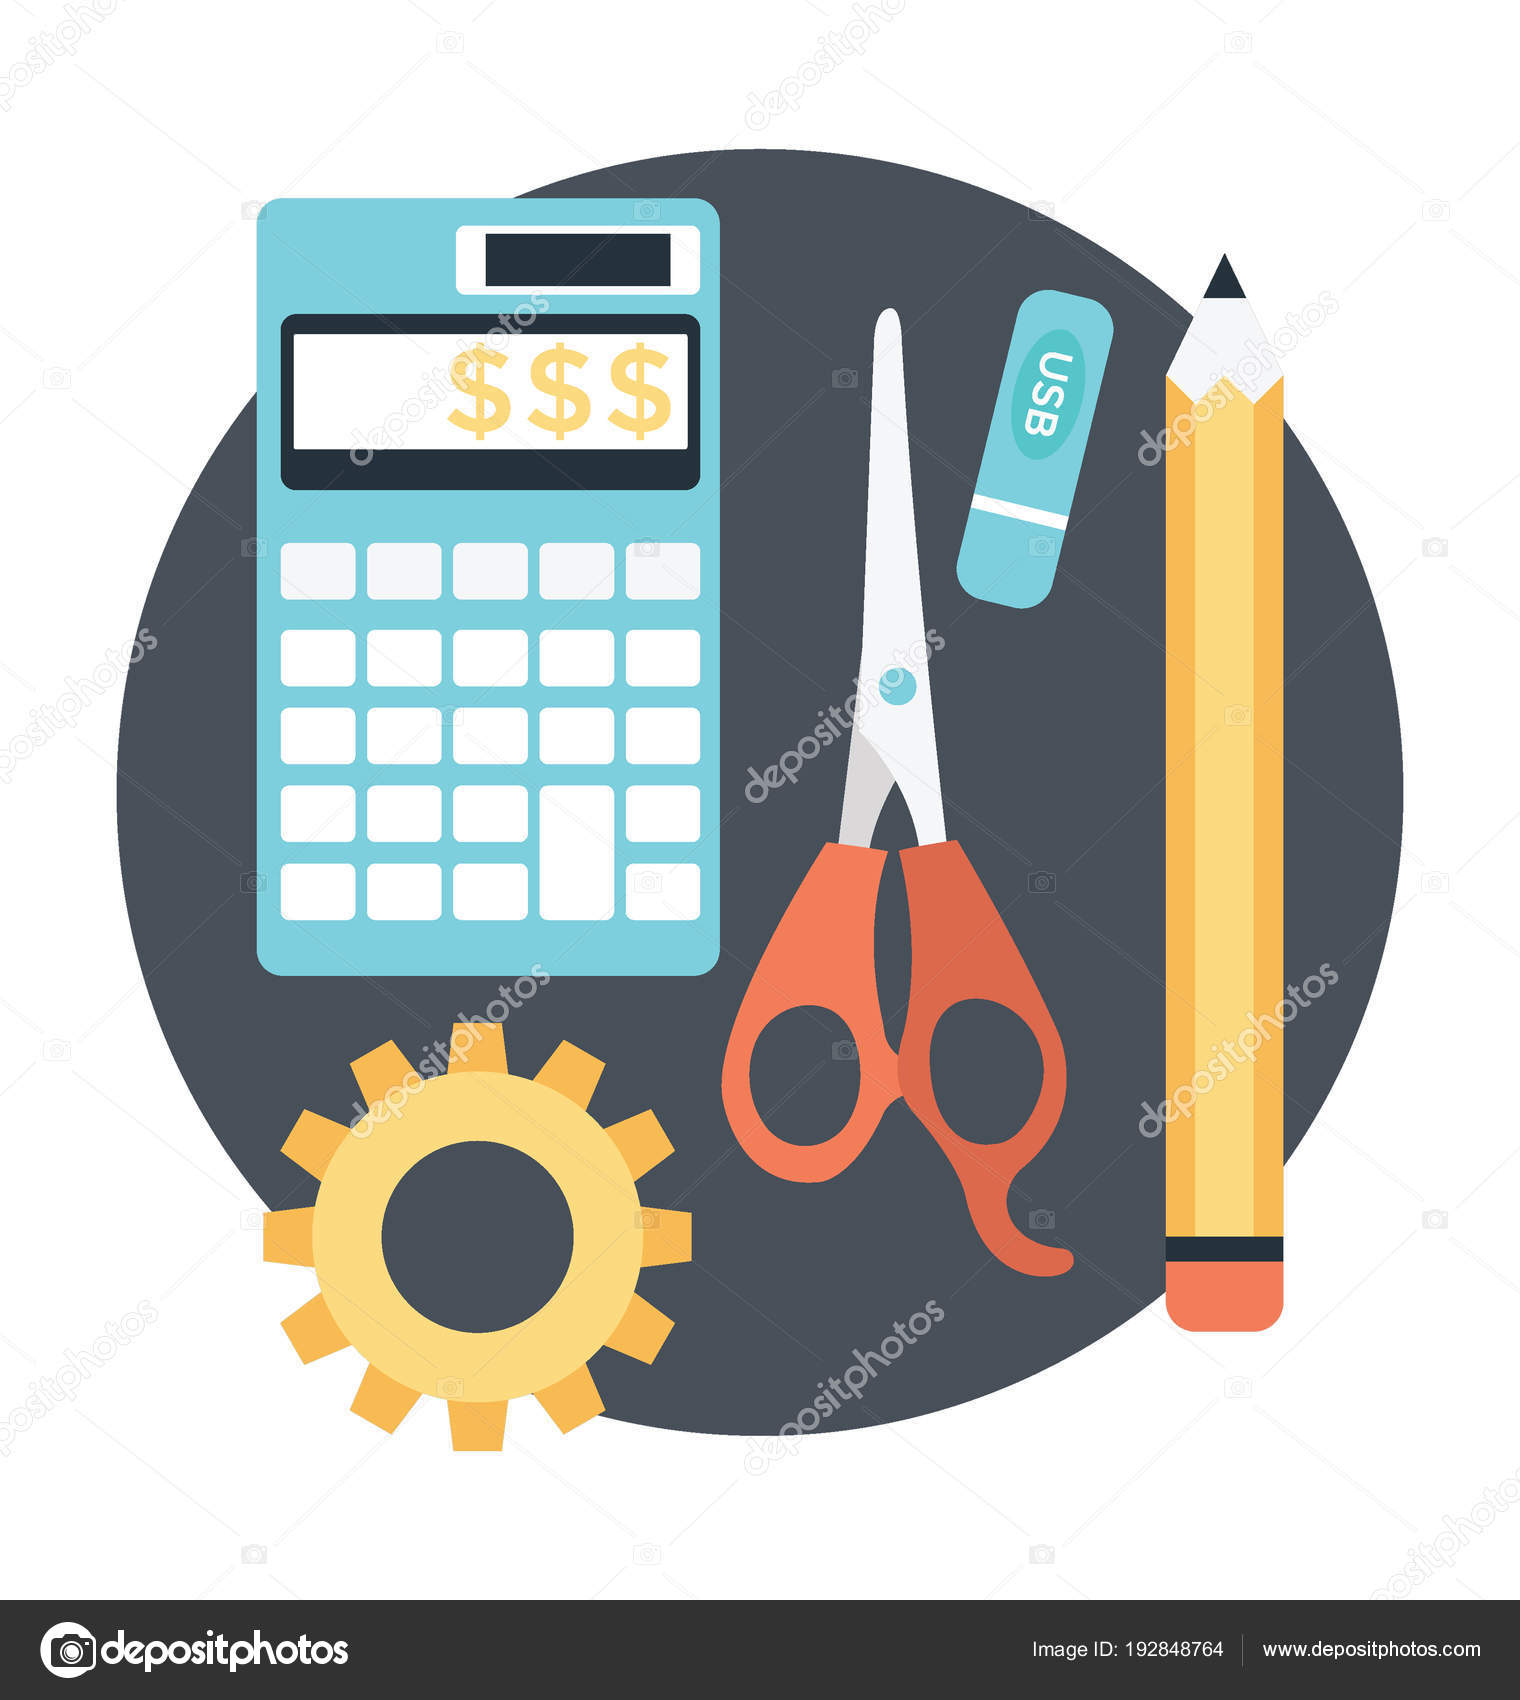 Office Stationery Tools Flat Icon Design Business Tools Stock Vector C Prosymbols